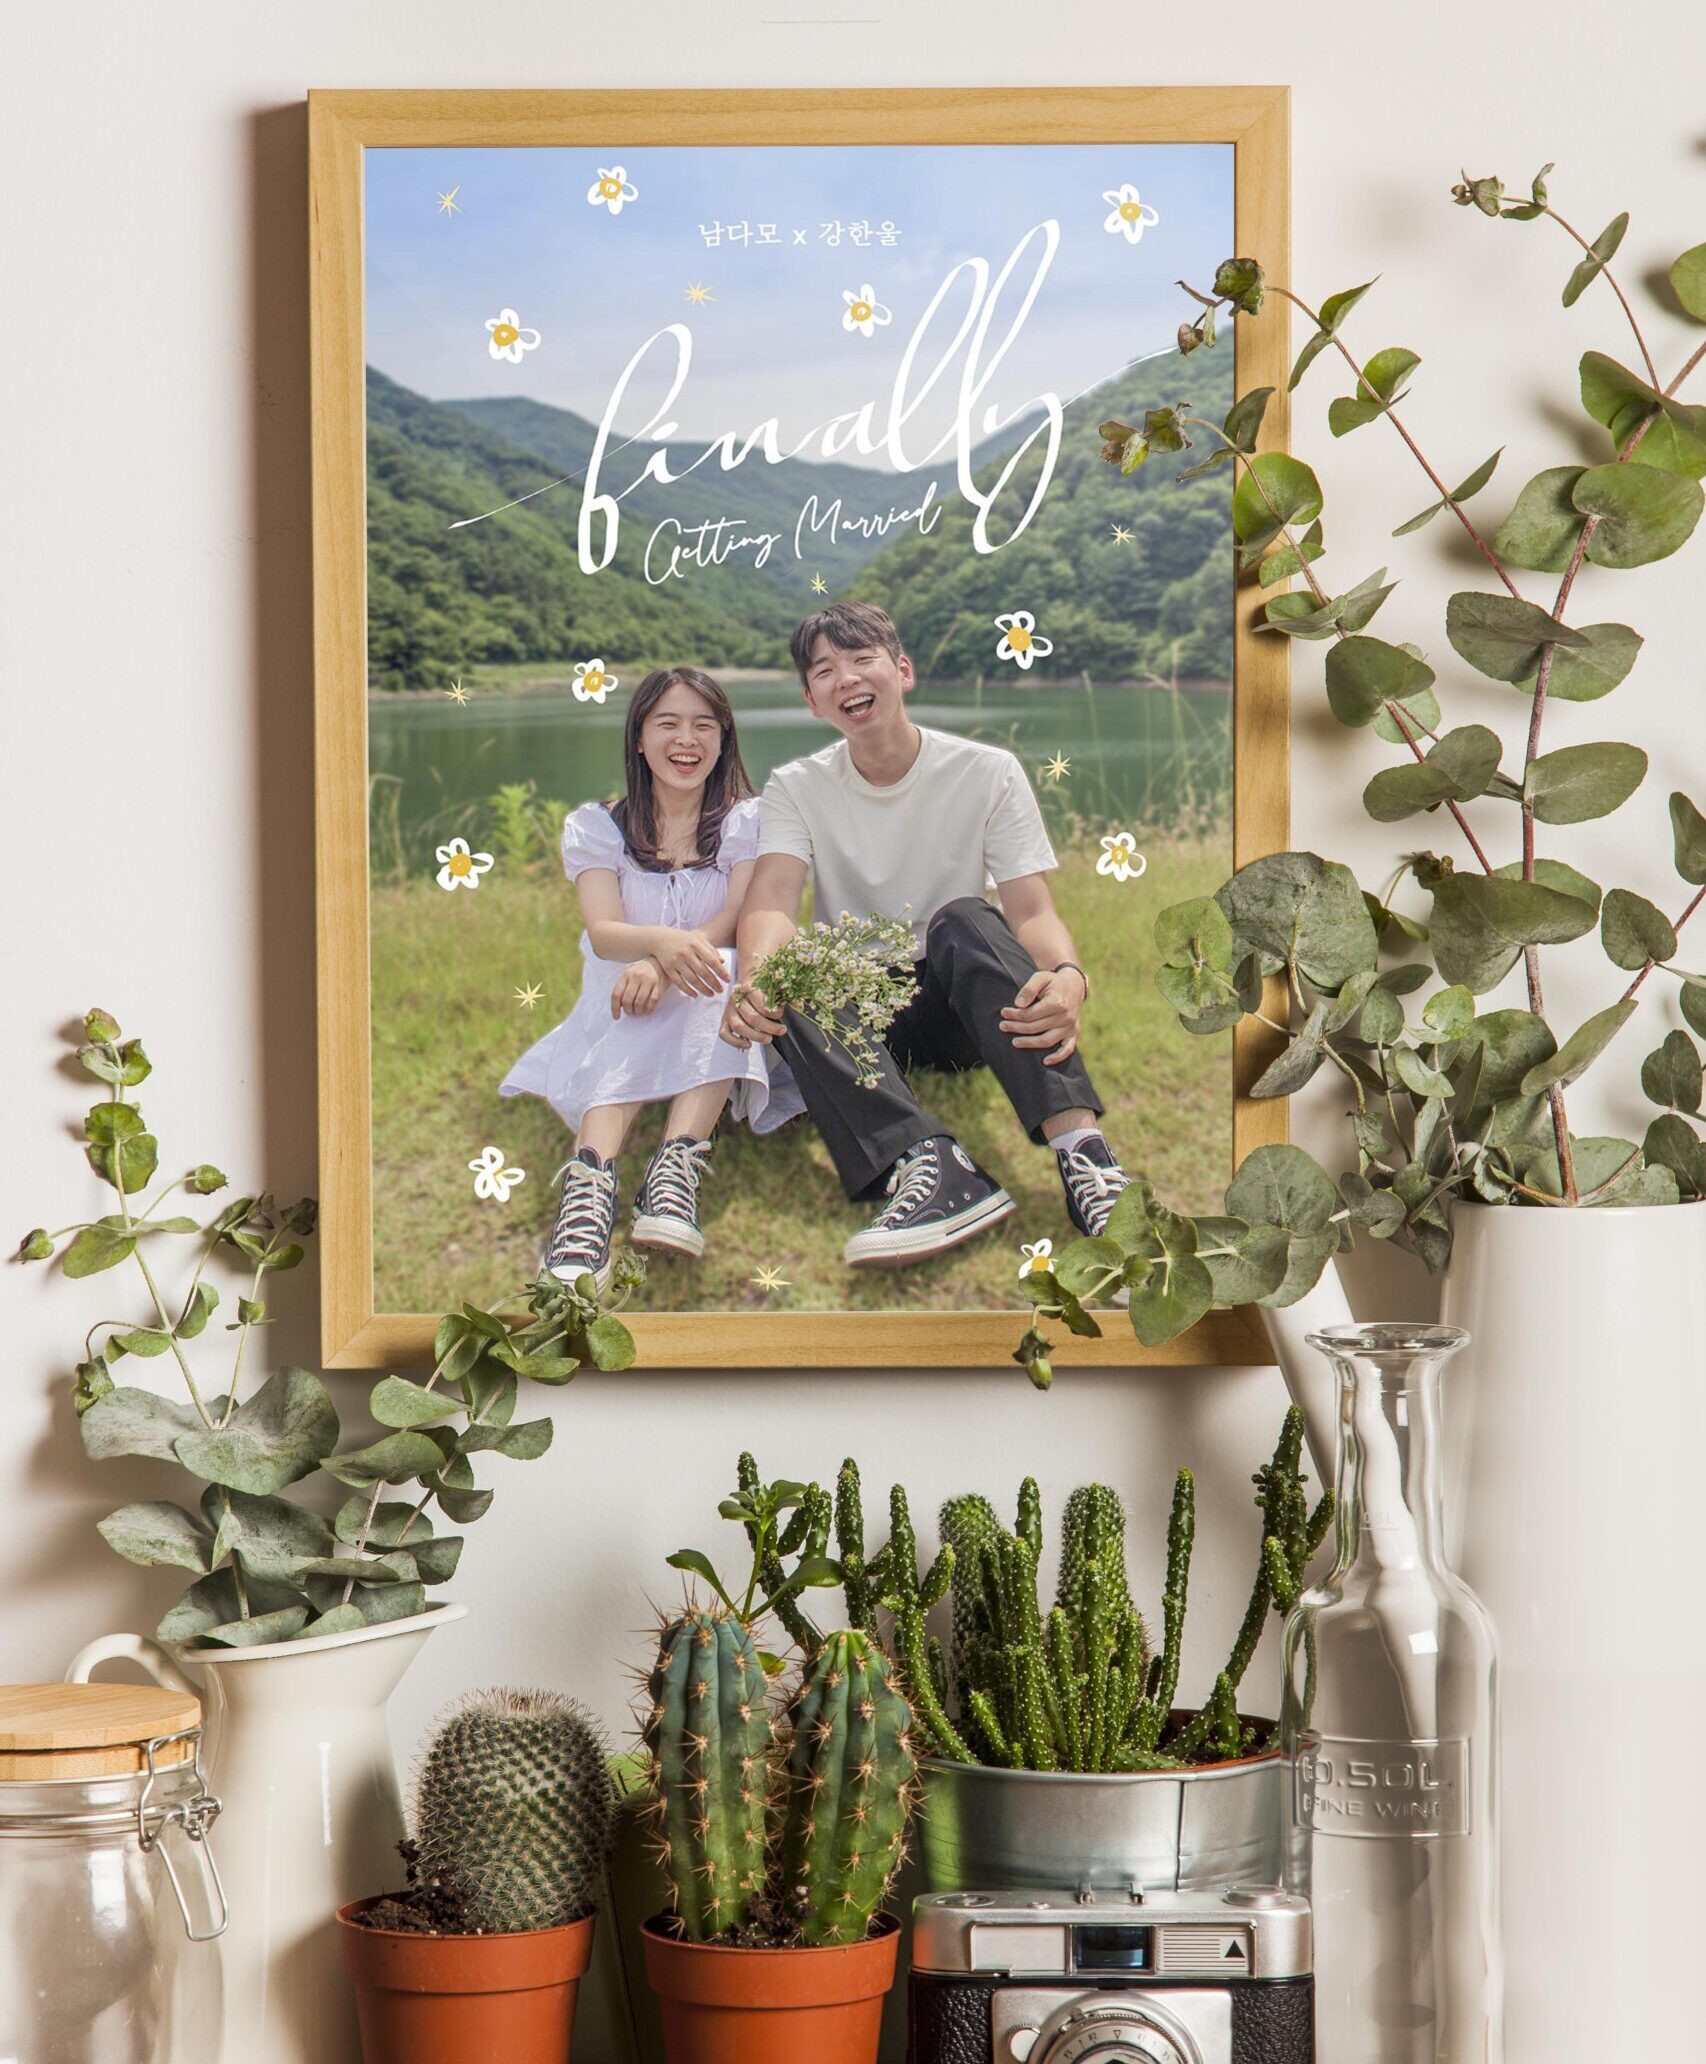 A couple is sitting on the ground in a frame, and the frame is hanging on the wall. There are a lot of plants surrounding the frame.